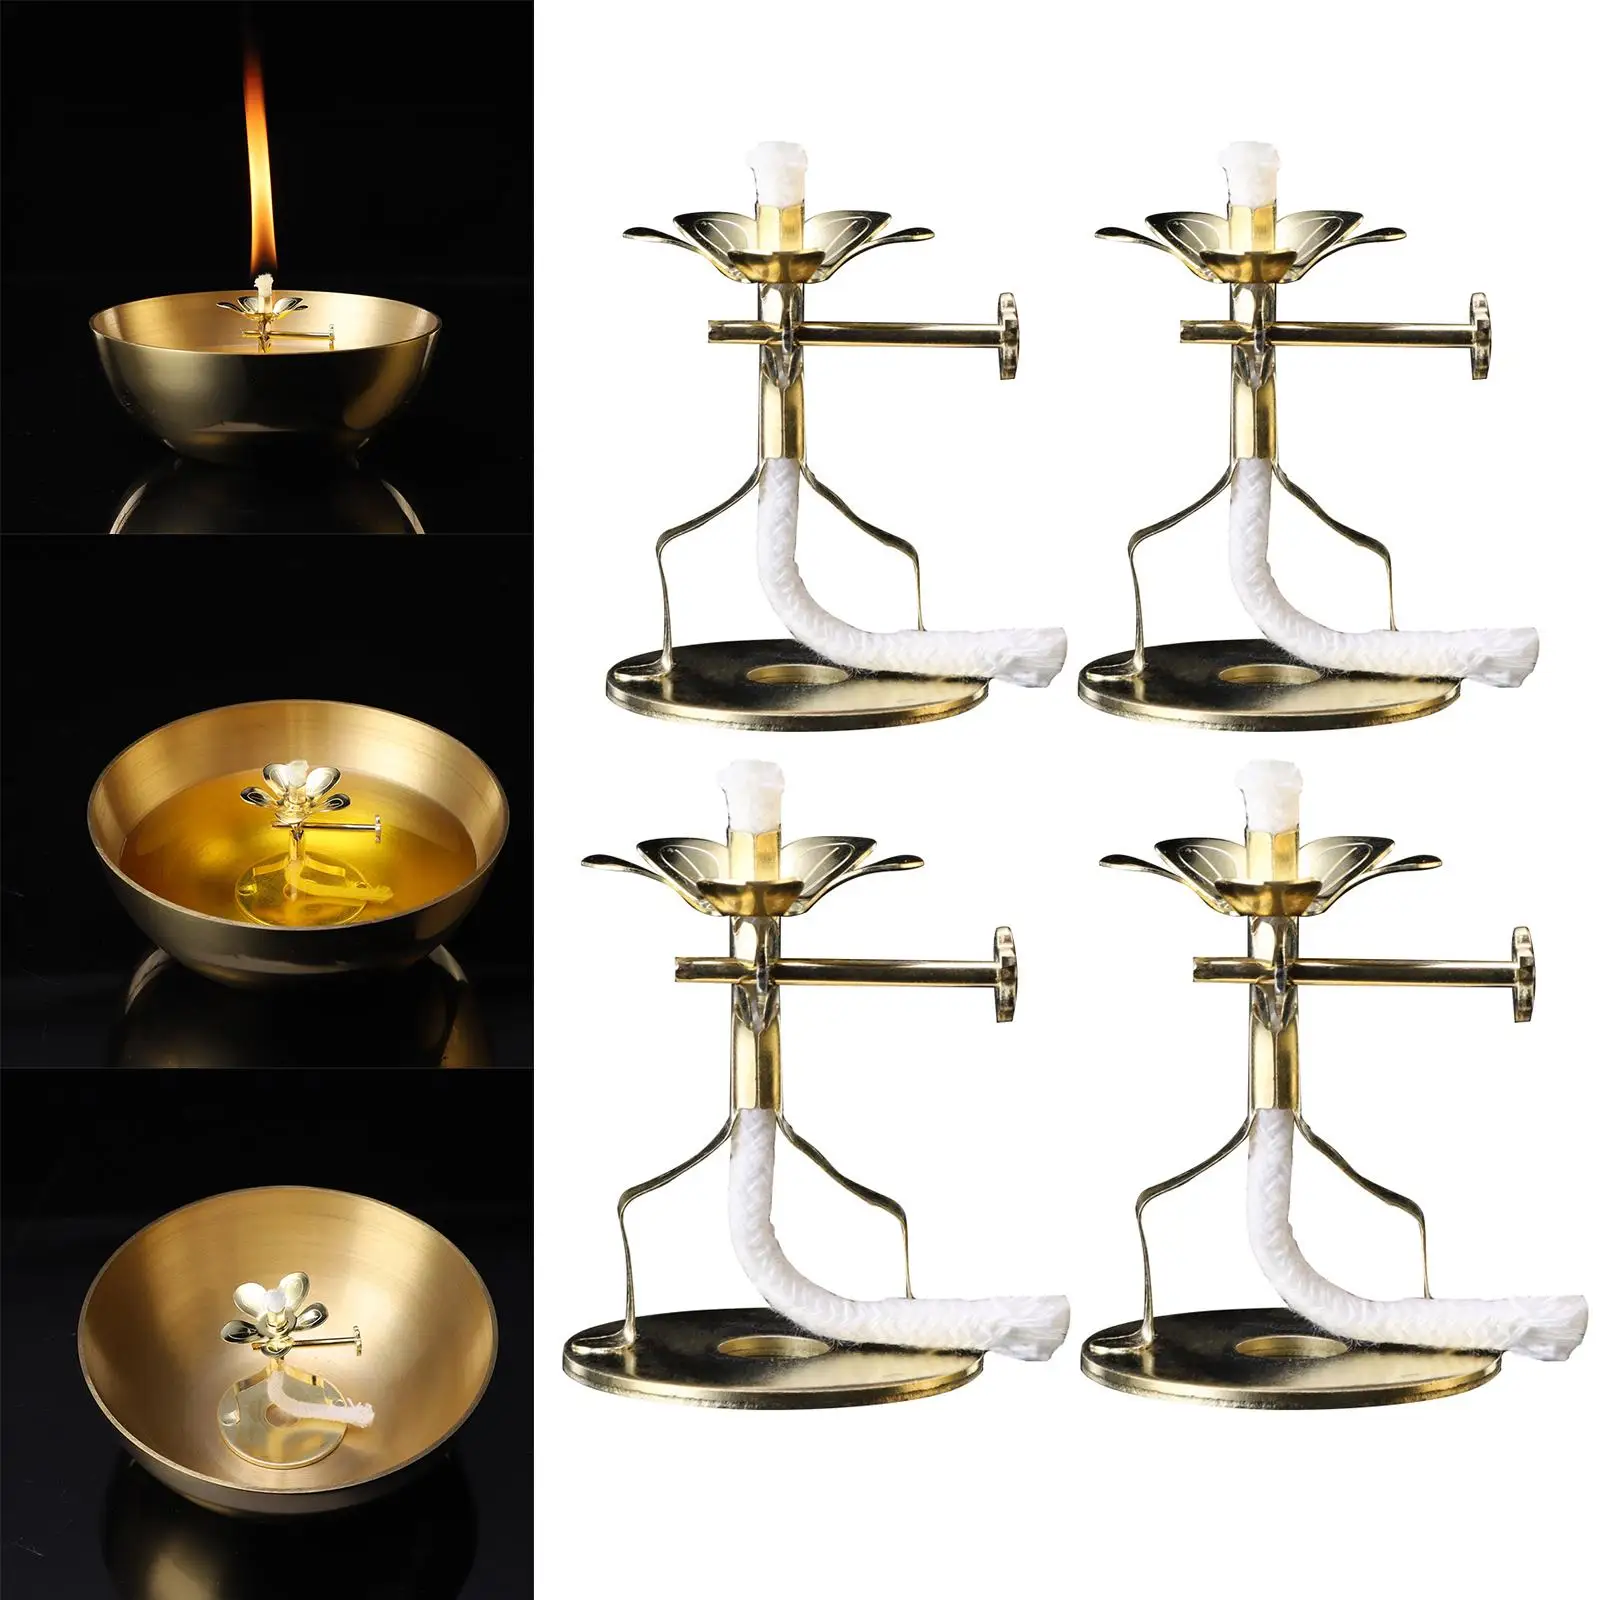 2x Golden Butter Lamp Wick Holder Wick Lamp Stand Buddha for Yoga Wedding